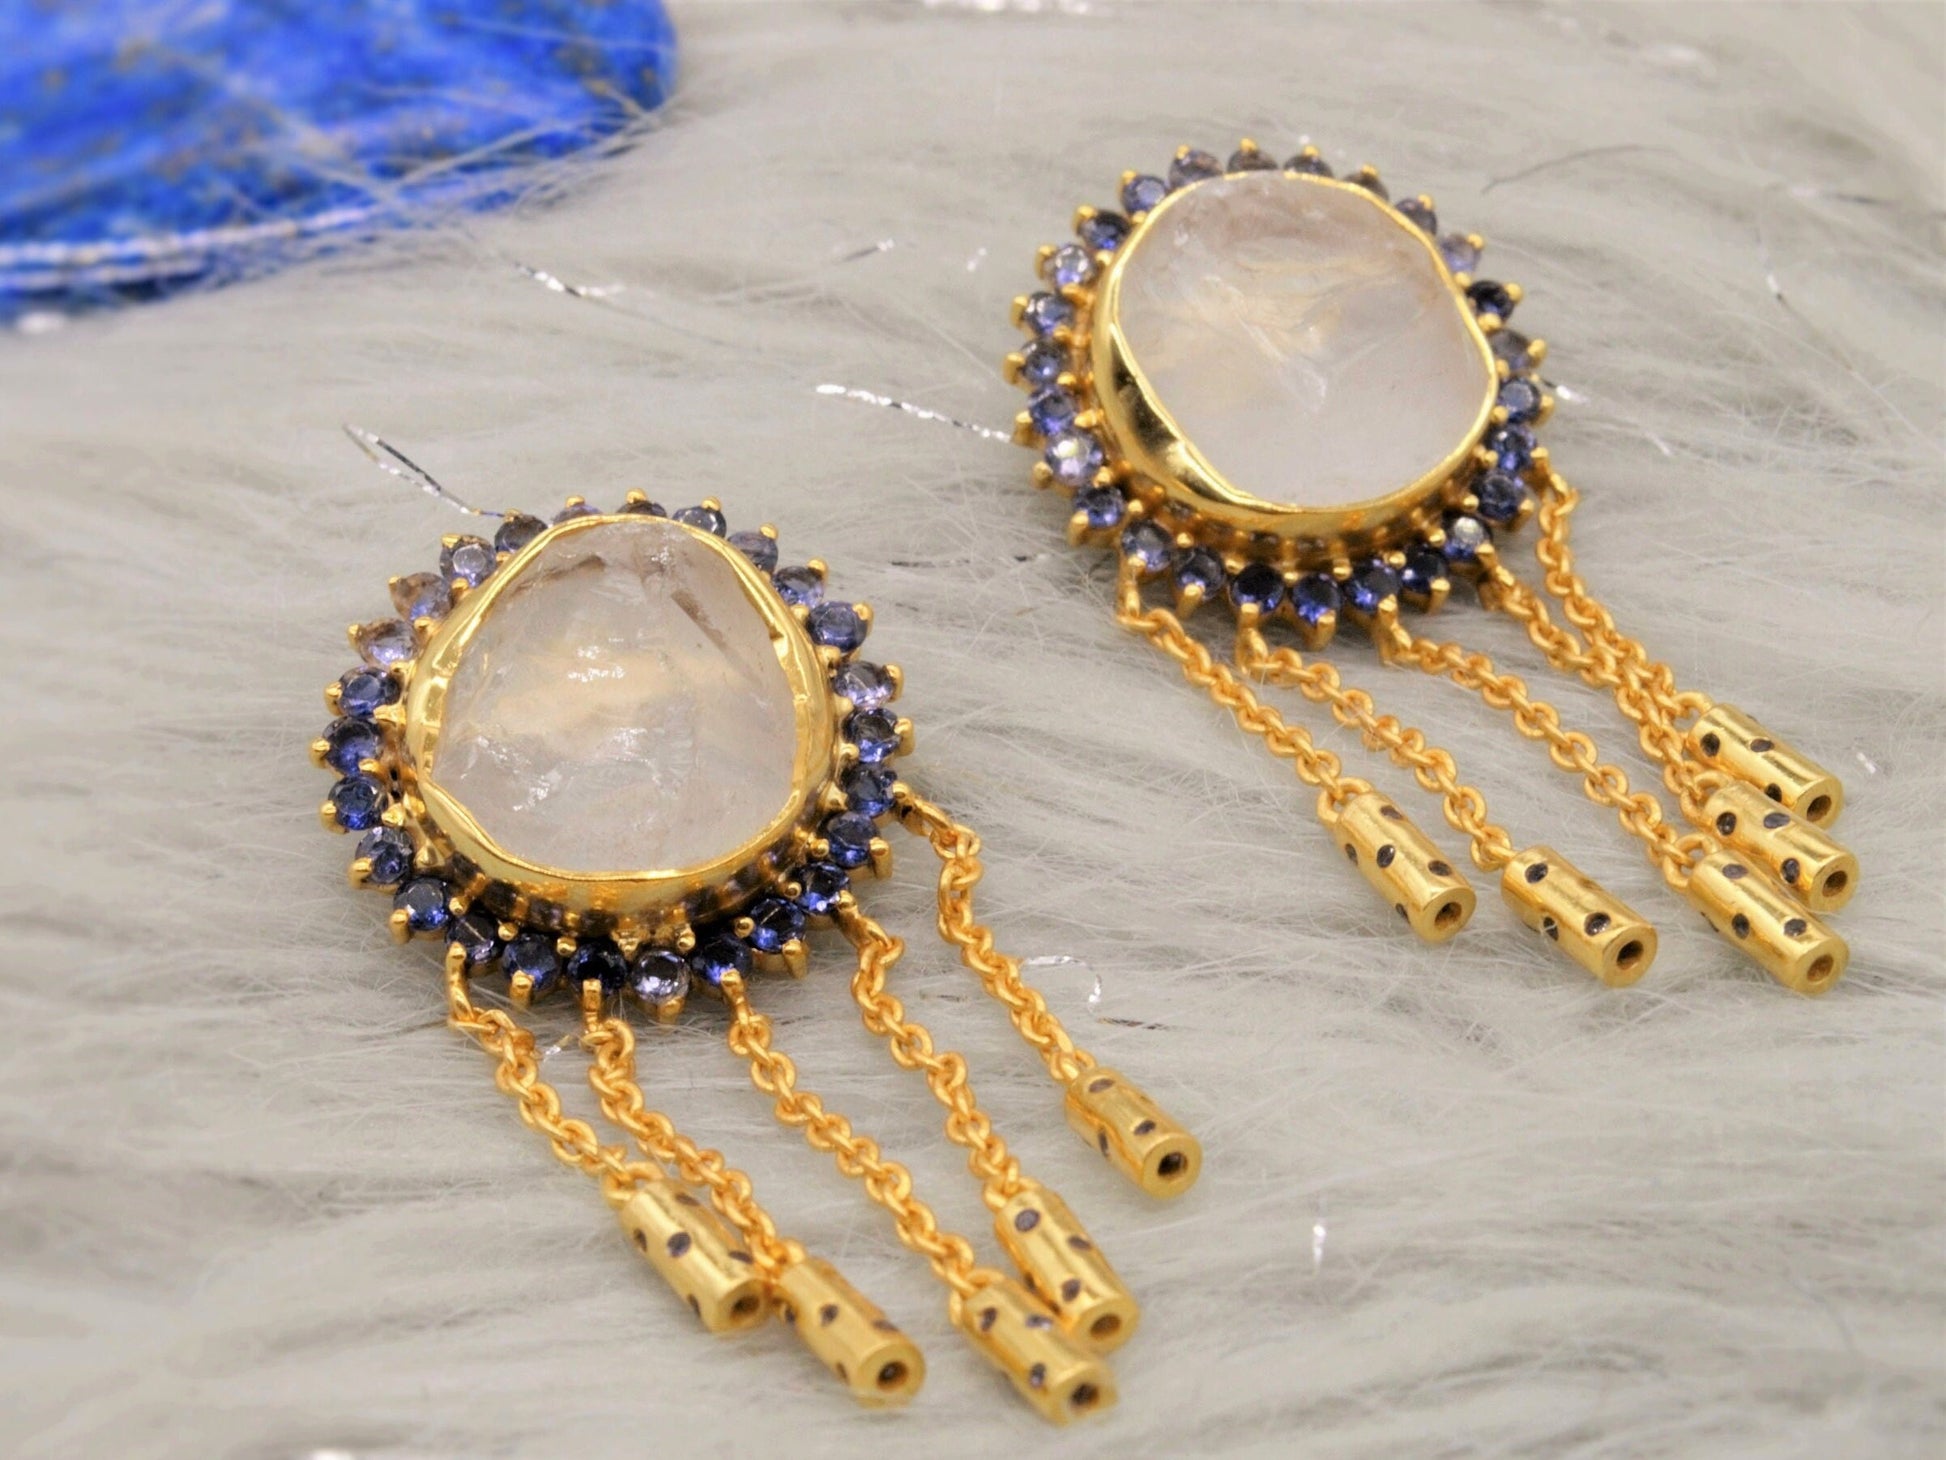 Iolite Clear Quartz Gold Earrings, Clear Quartz Crystal, Dangle Drop Earrings, Unique Gemstone Statement Earrings, Birthday Gift For Her